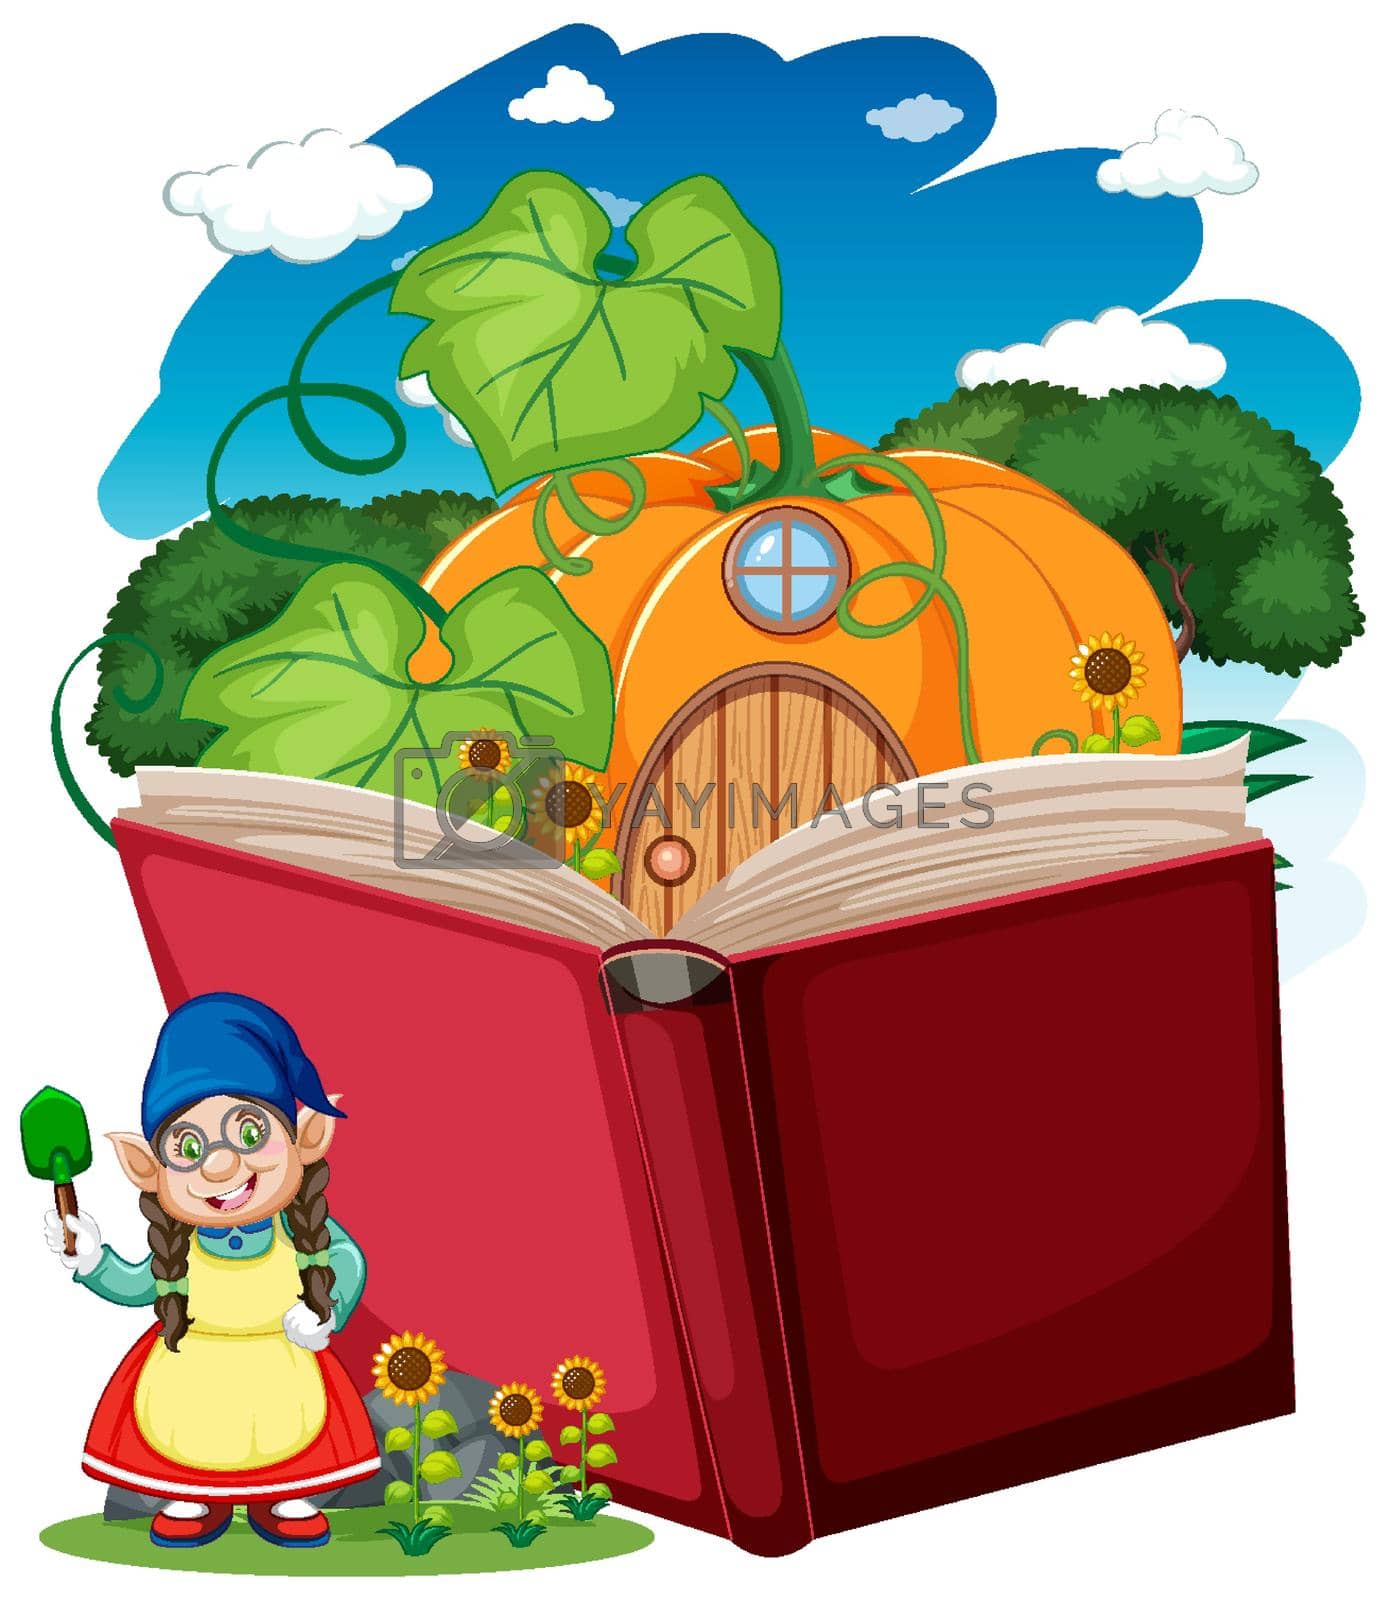 Royalty free image of Gnome and pumpkin house with pop up book cartoon style on white background by iimages